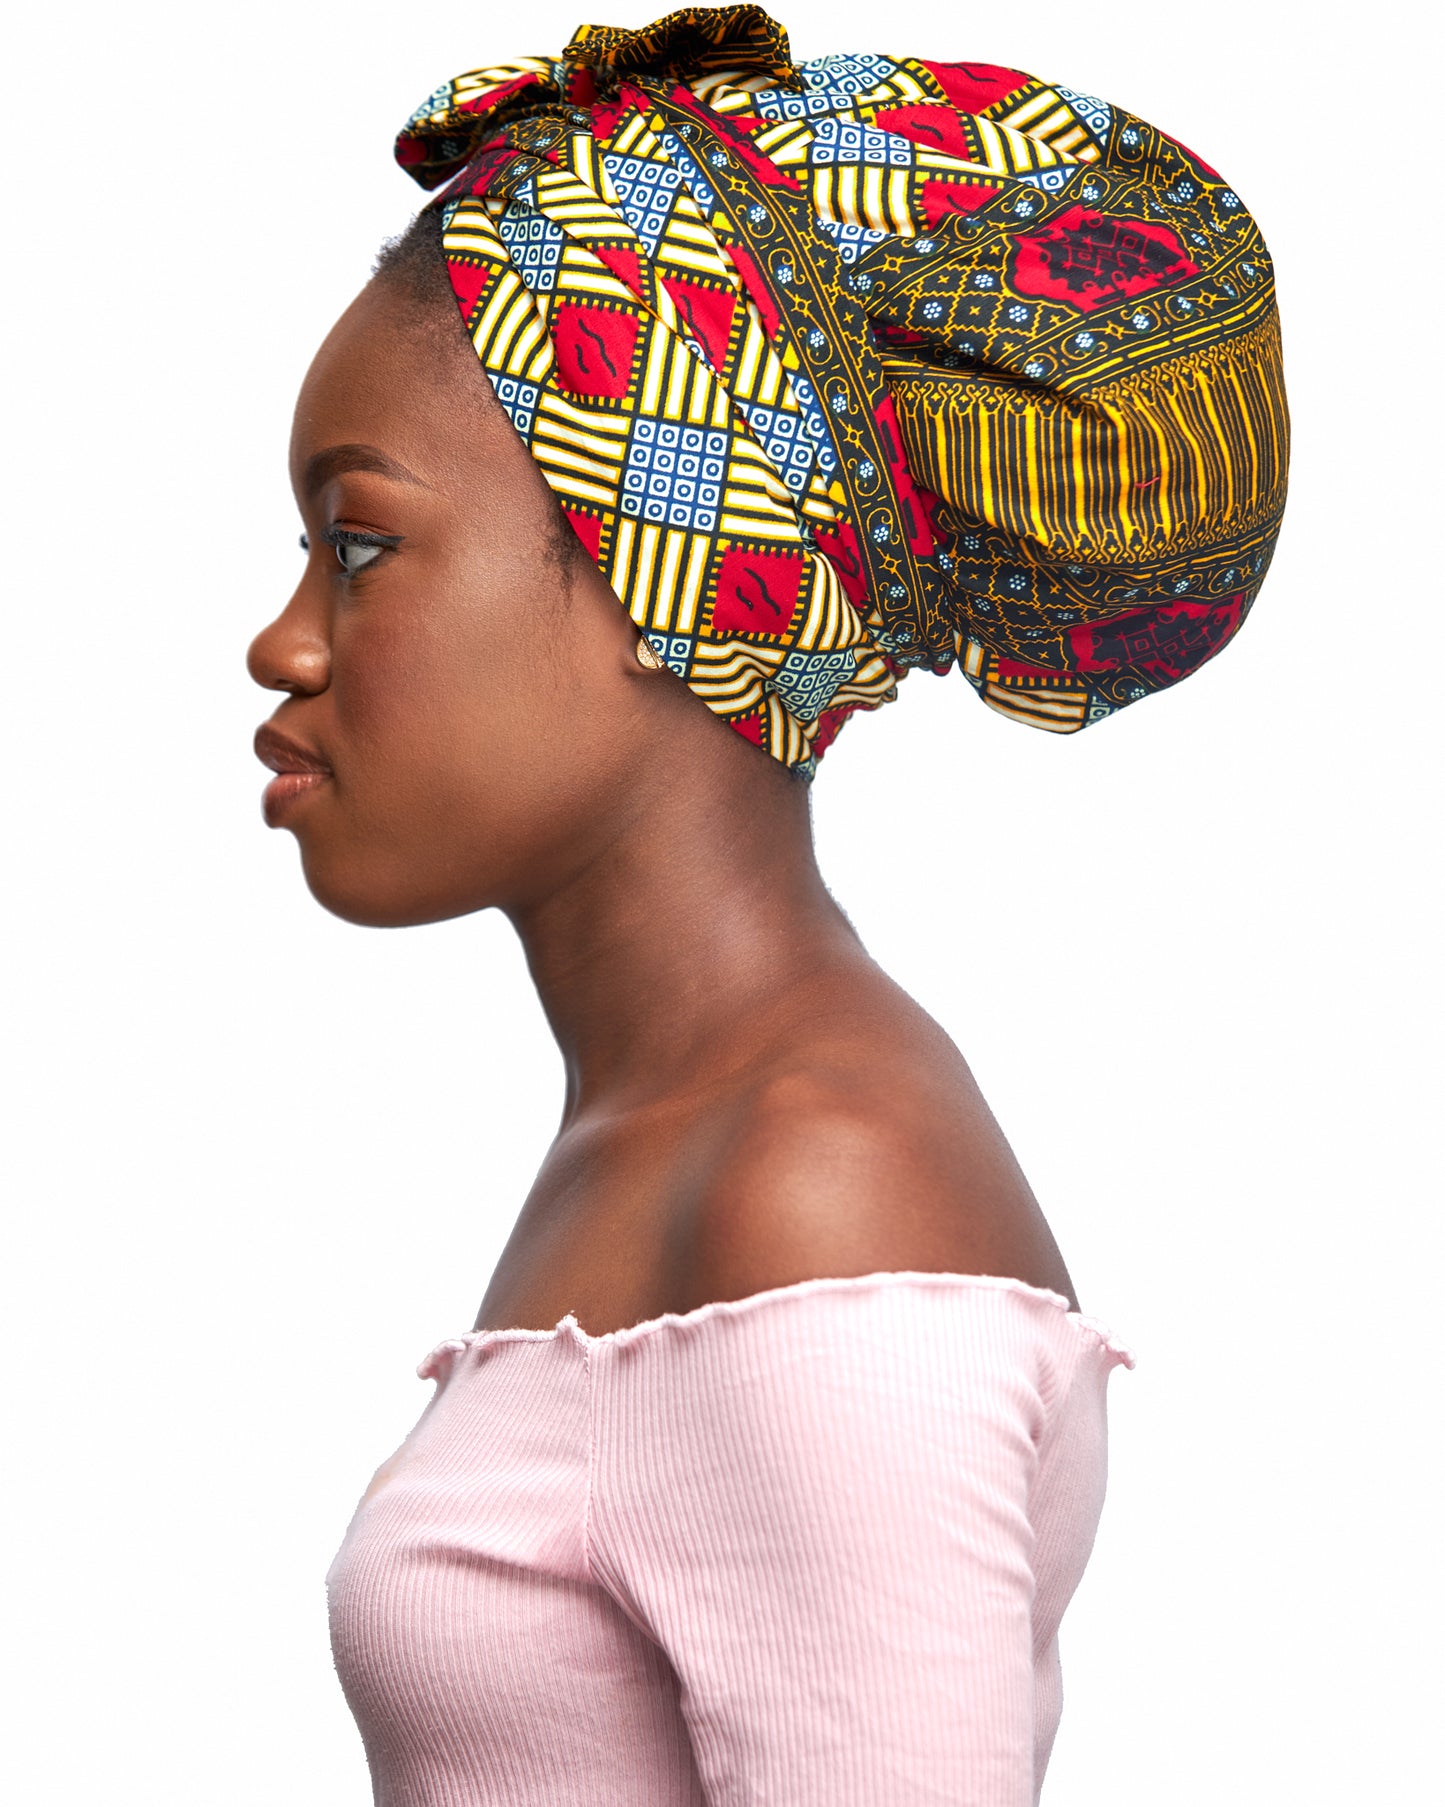 Ankara Wax Print Made of Red, Blue, Gold, And White Blended Beautiful Colours And Pattern, Hand Made Elastic Silklined Bonnet With Band